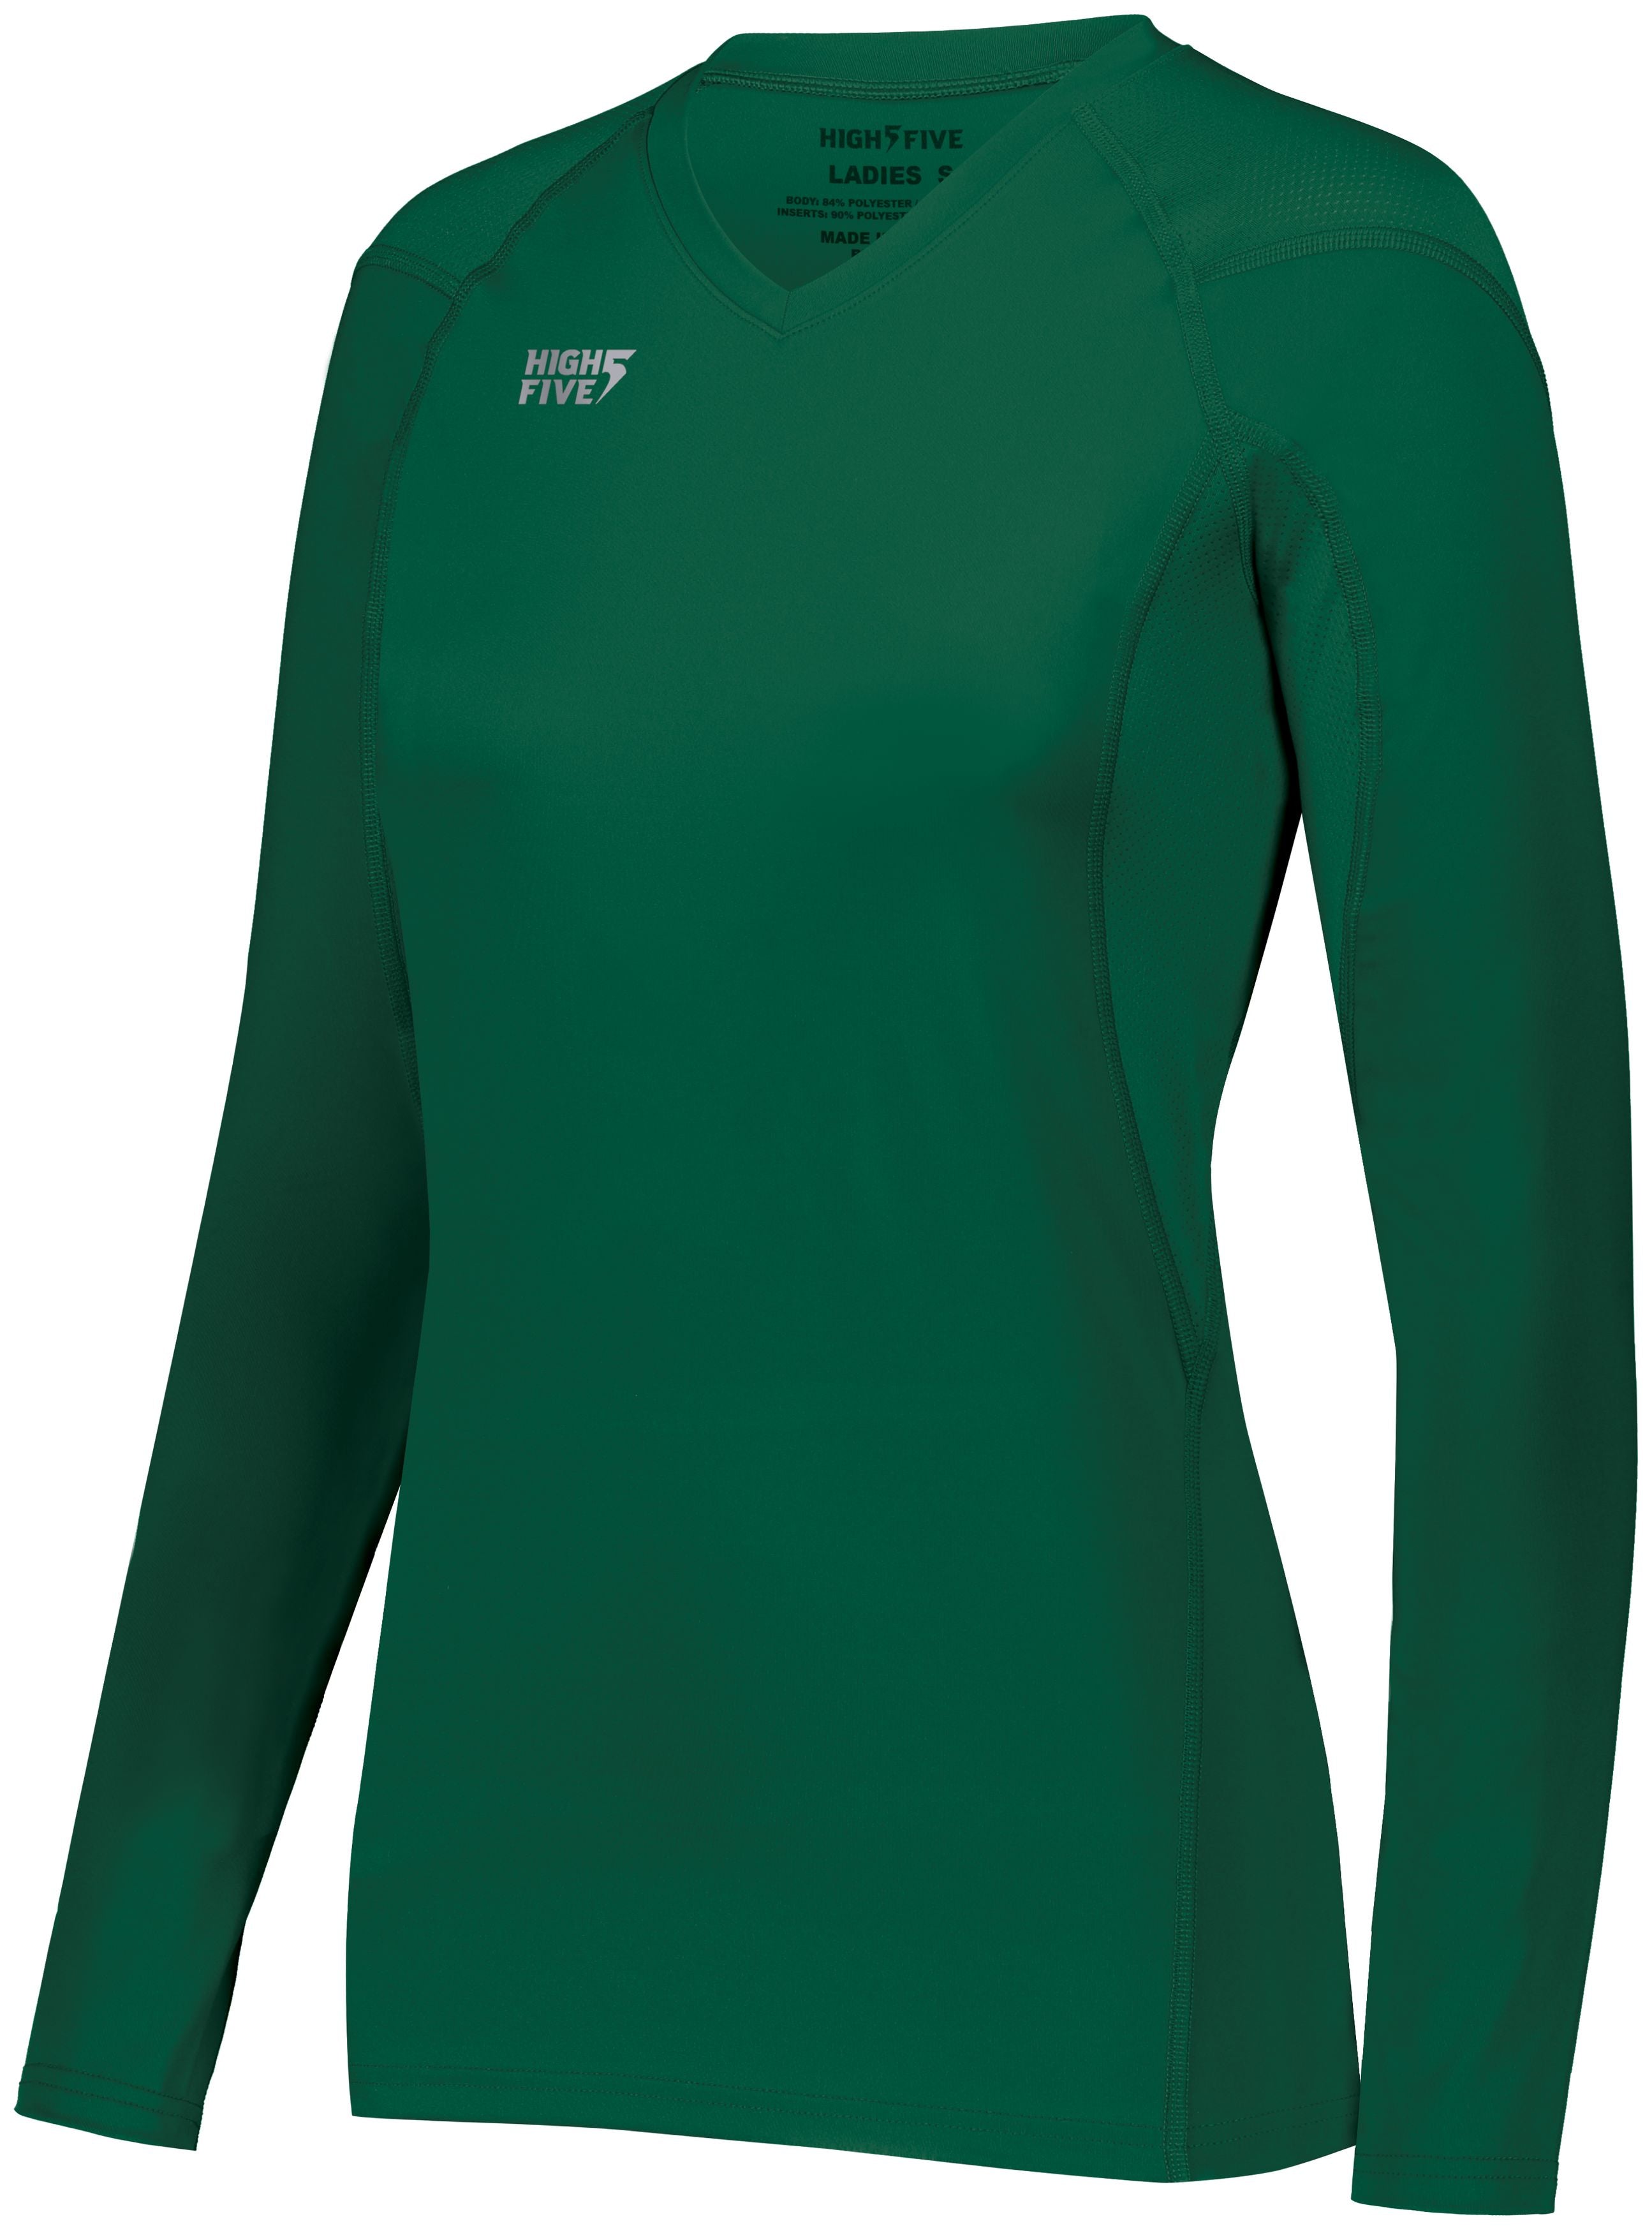 High 5 Ladies Truhit Long Sleeve Jersey in Forest  -Part of the Ladies, Ladies-Jersey, High5-Products, Volleyball, Shirts product lines at KanaleyCreations.com